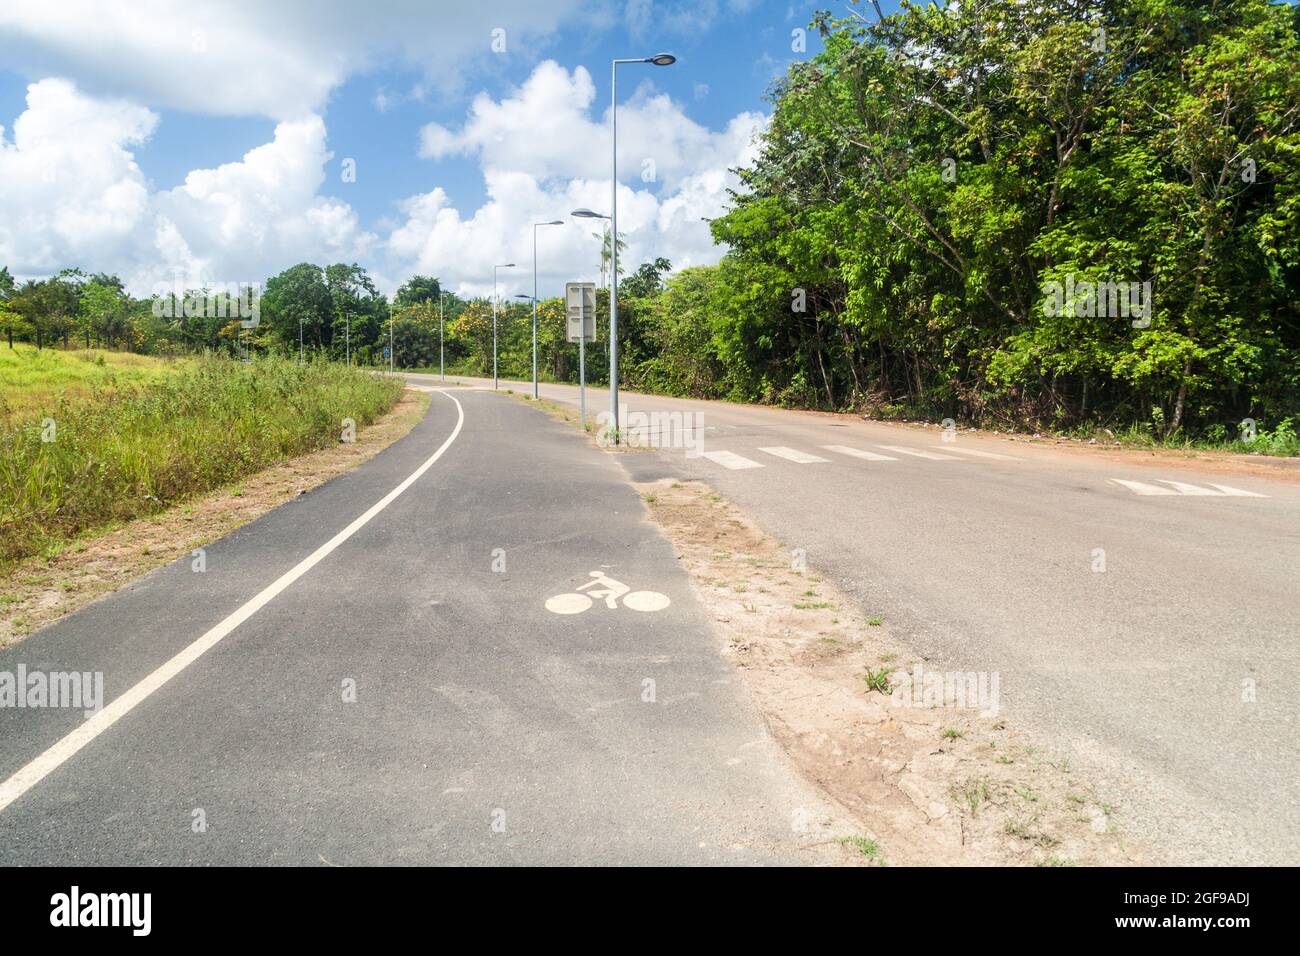 Road with bicycle lane in Saint-Georges town, French Guiana Stock Photo